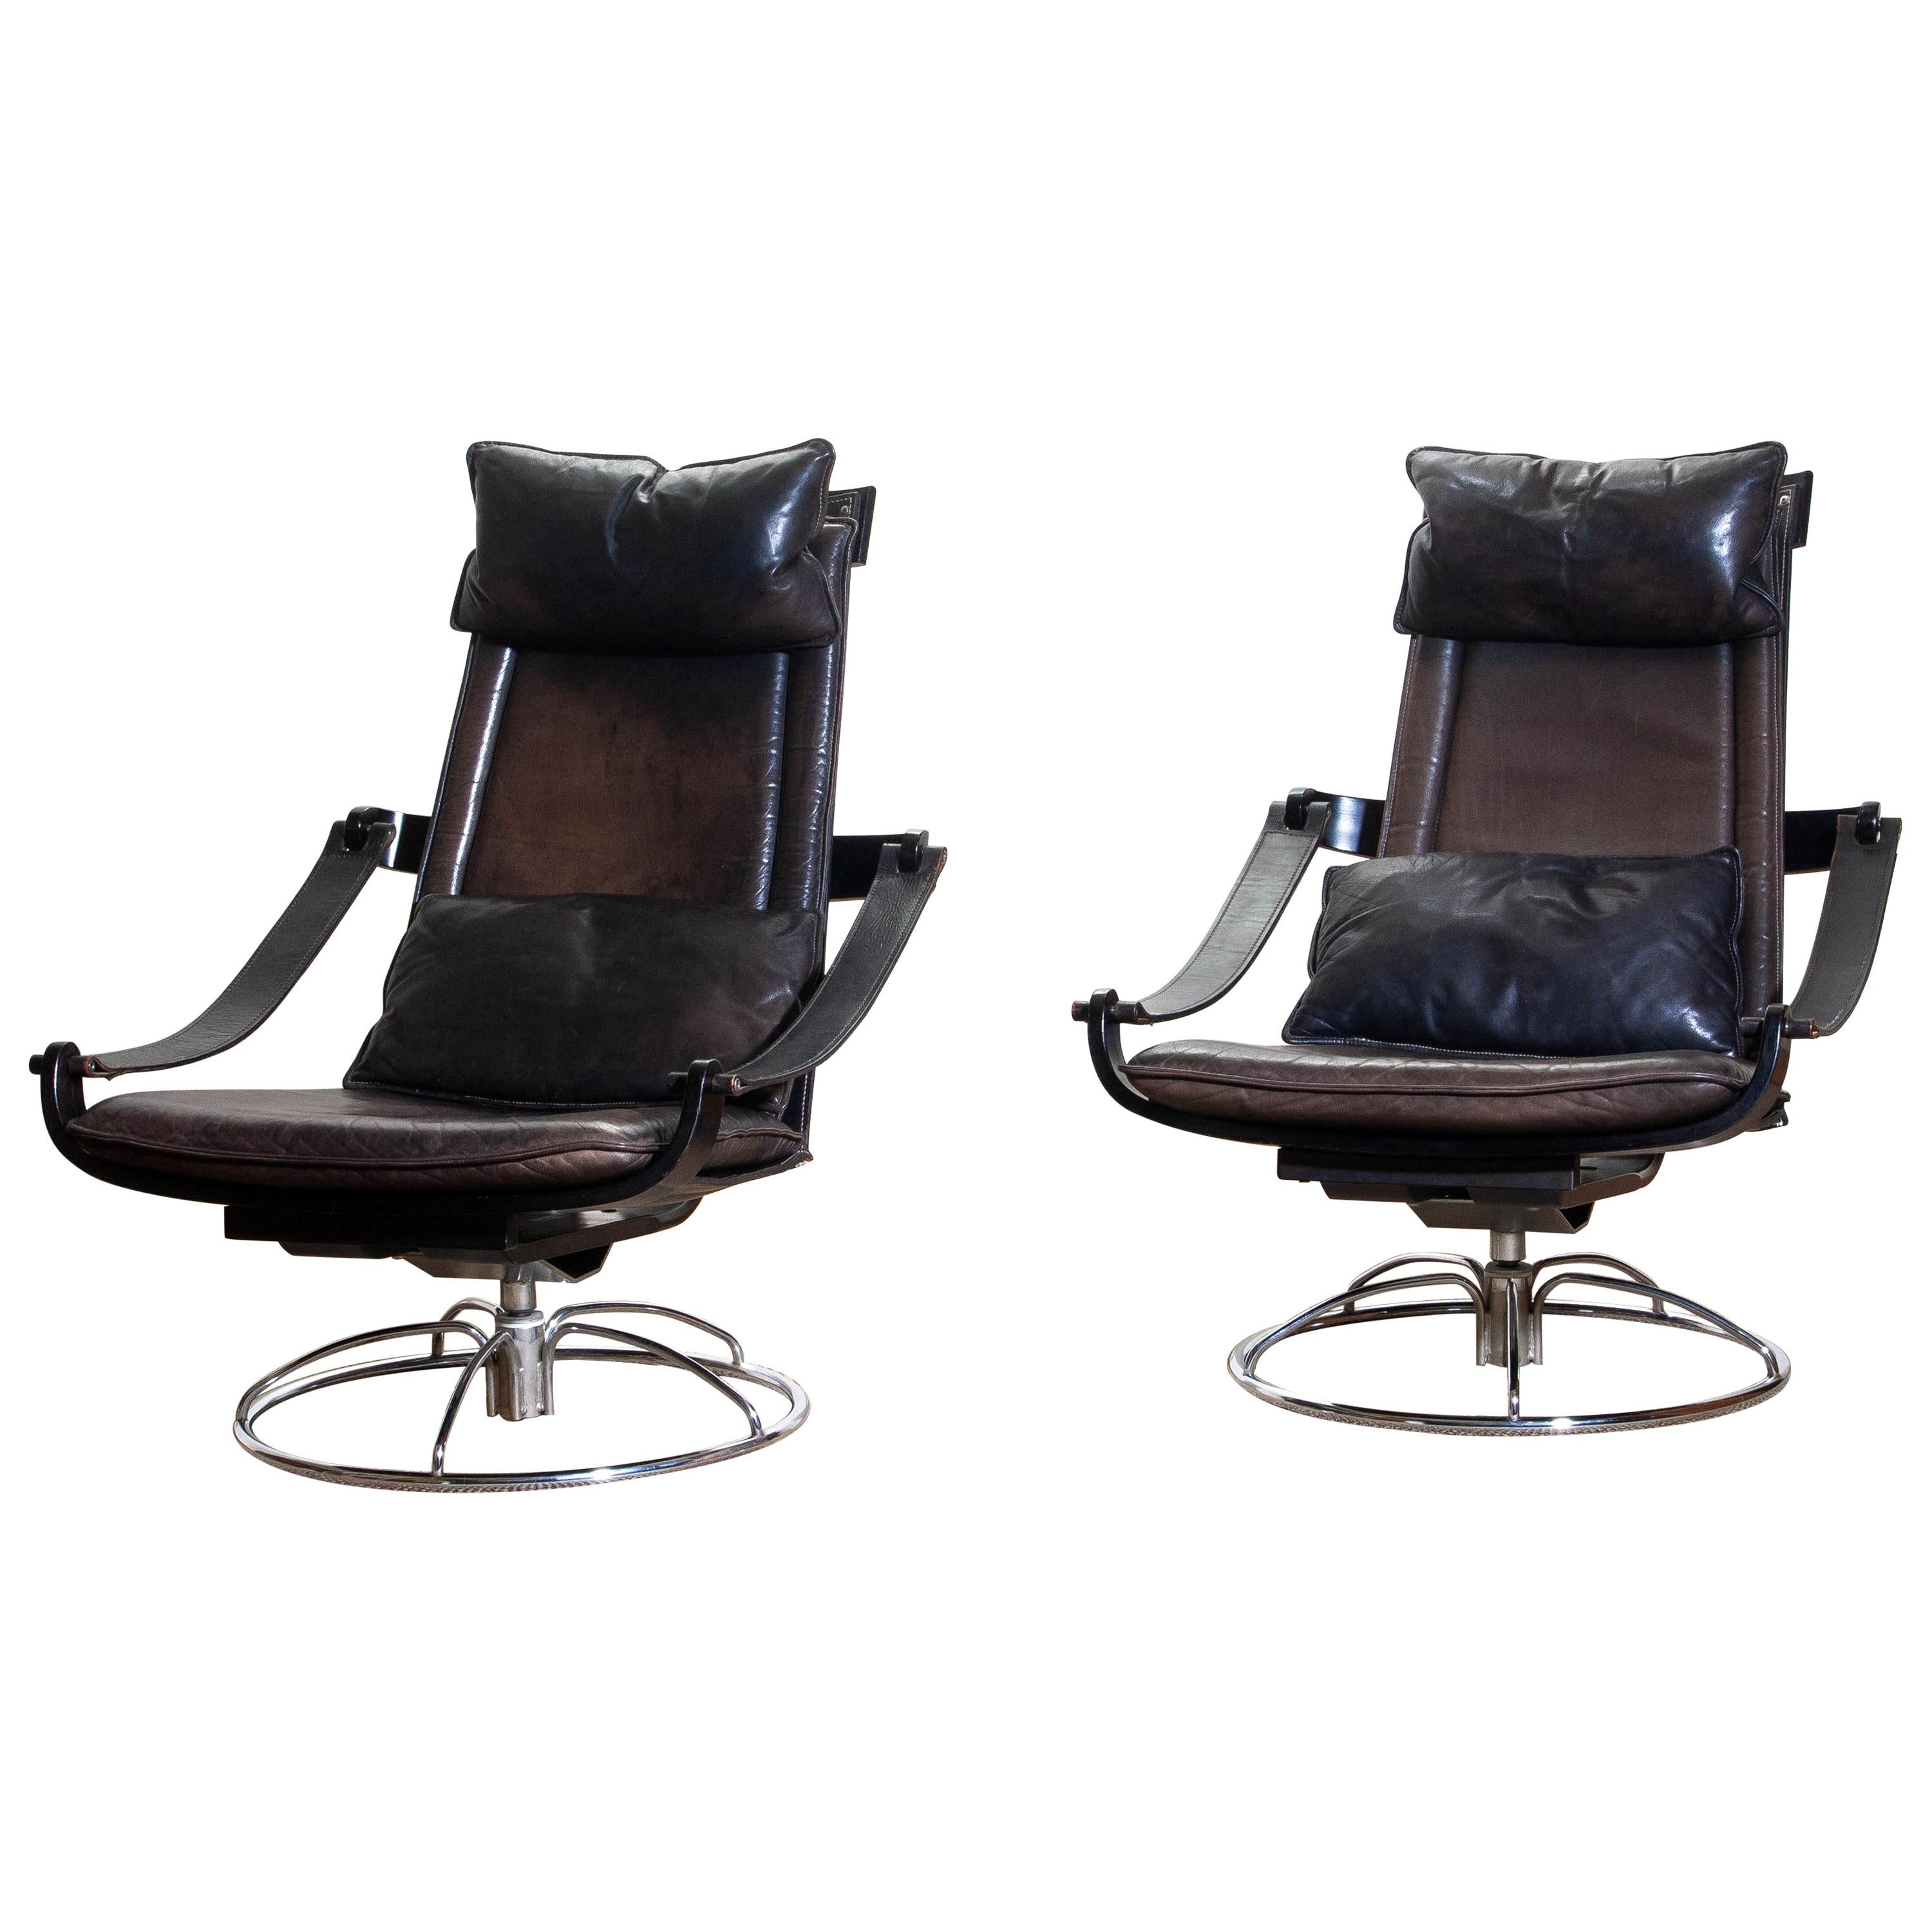 Extremely beautiful and artistic set of two swivel easy / lounge chairs designed by Åke Fribytter for Nelo, Sweden.
These high quality chairs features a plywood frame and brown leather cushions and a chromed metal base.
The armrests are made of